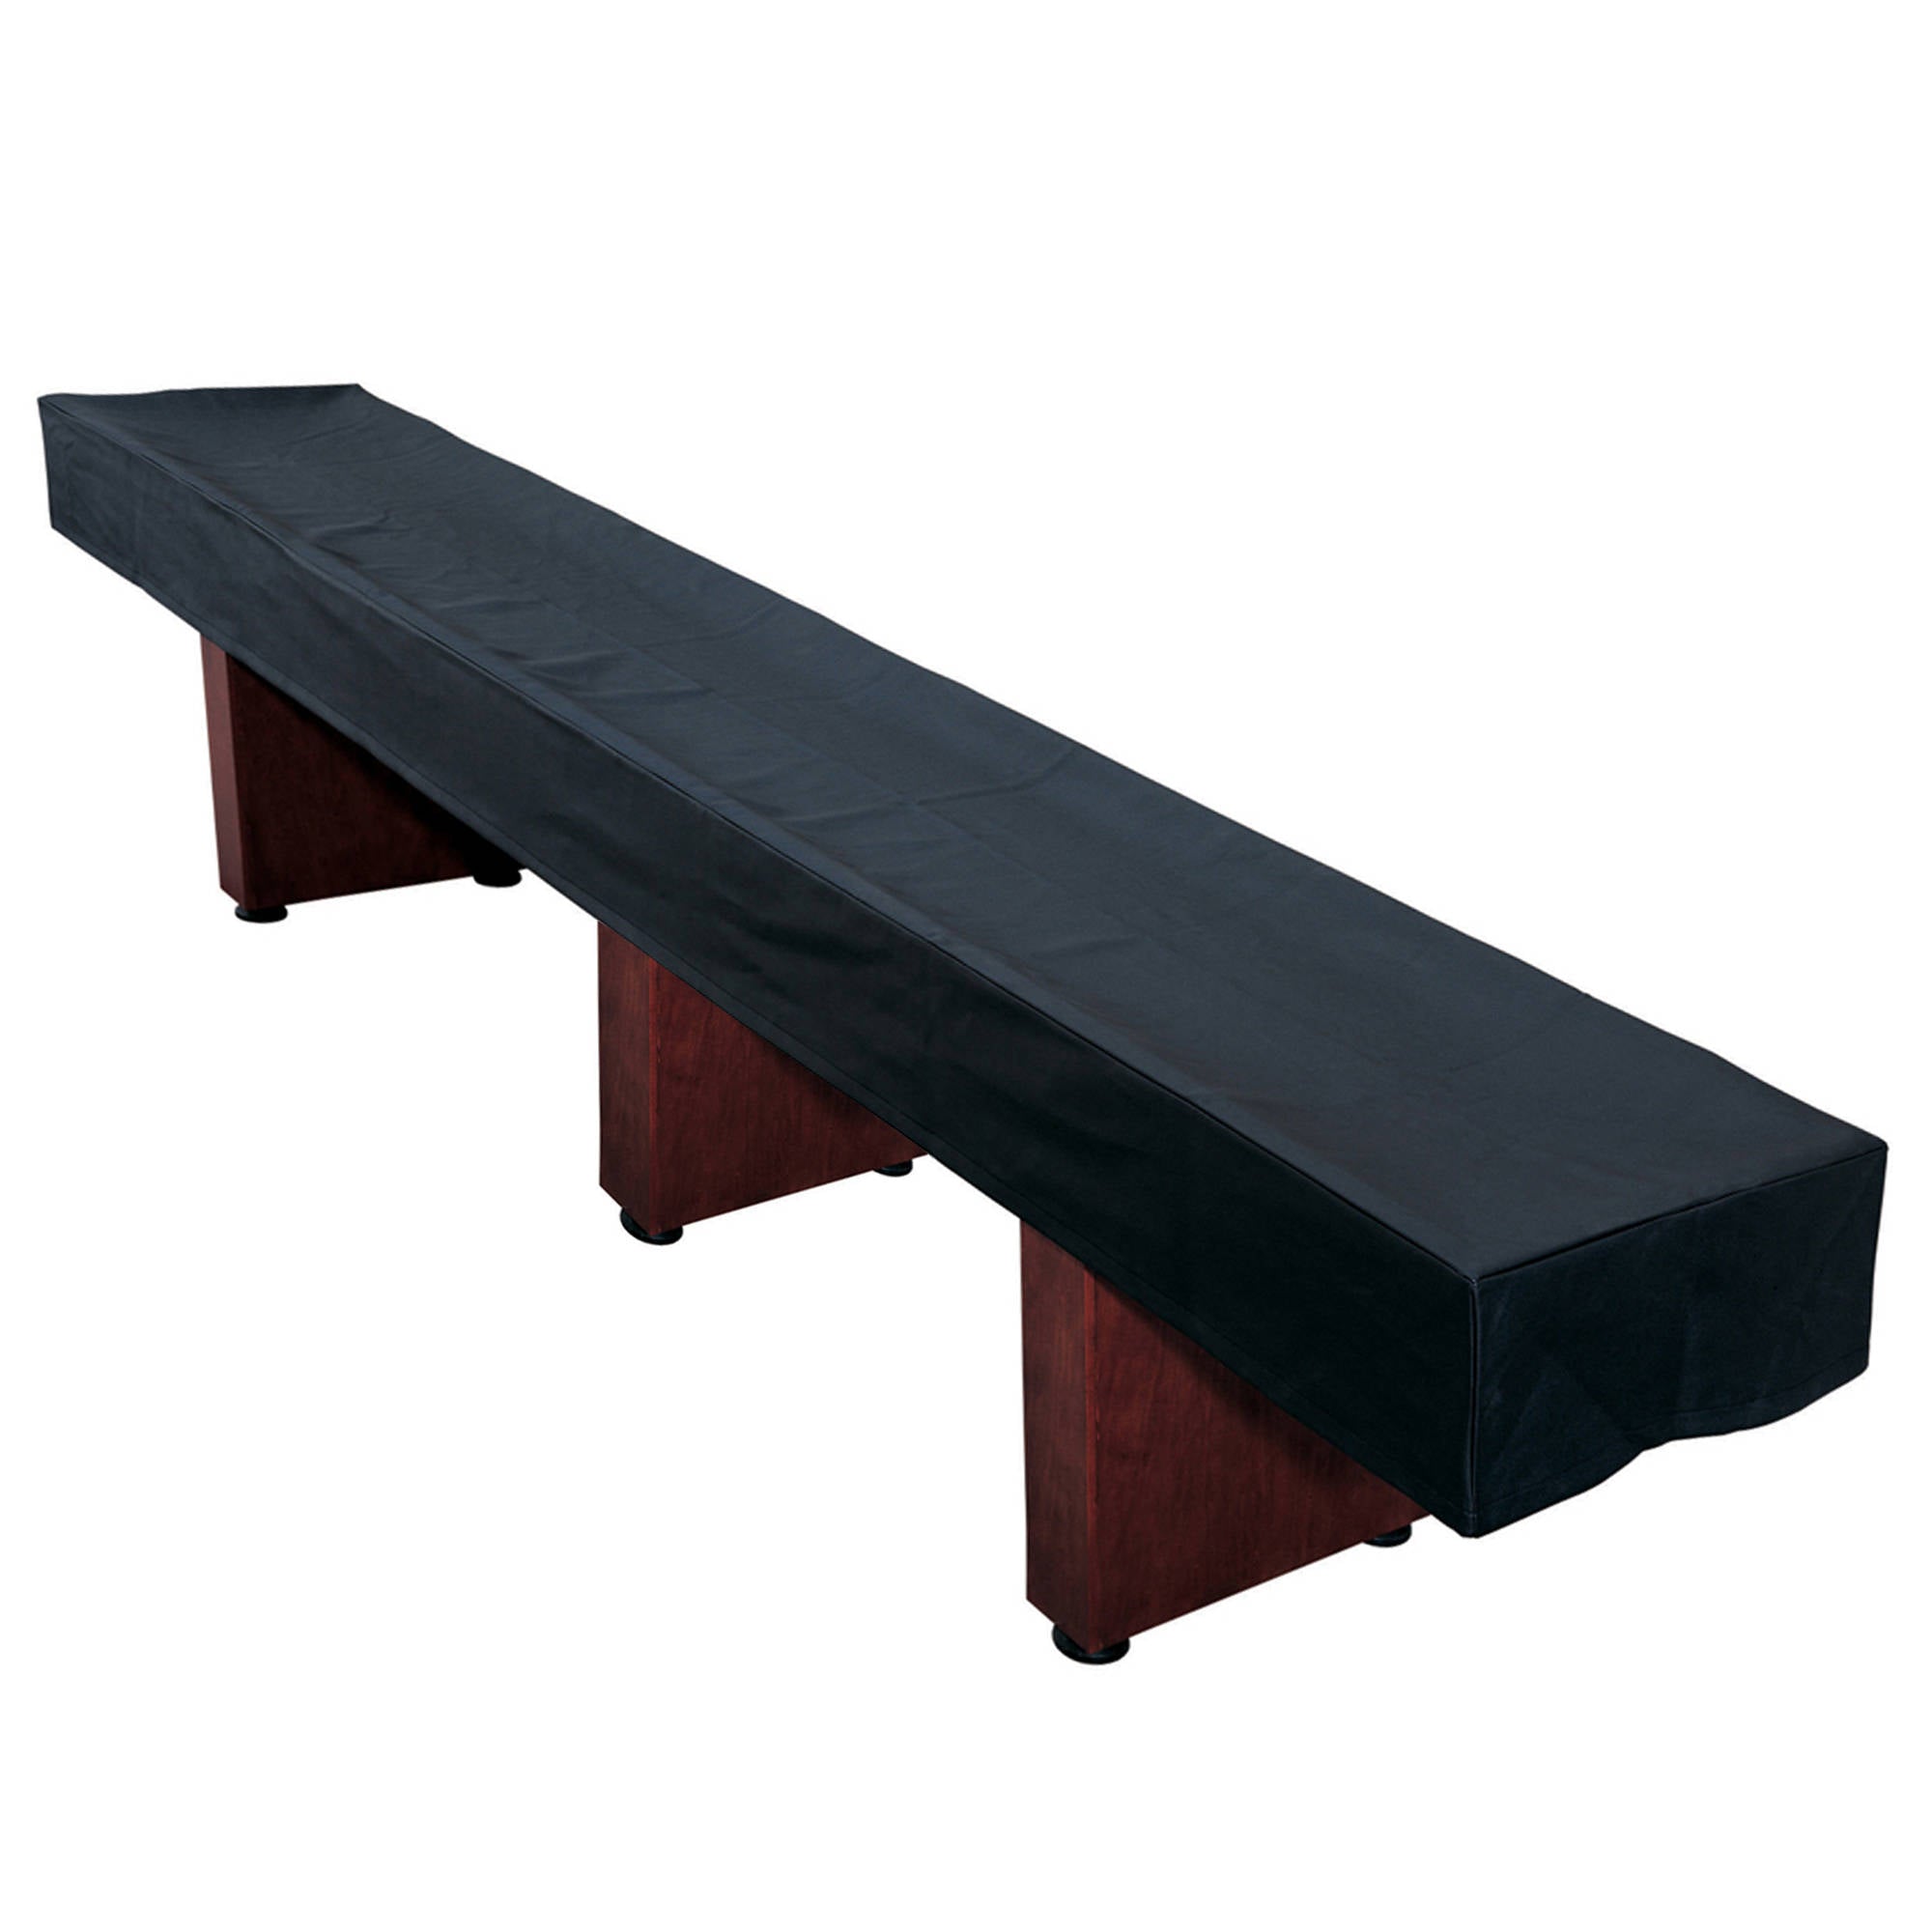 Cover for 14' Shuffleboard Table - Black